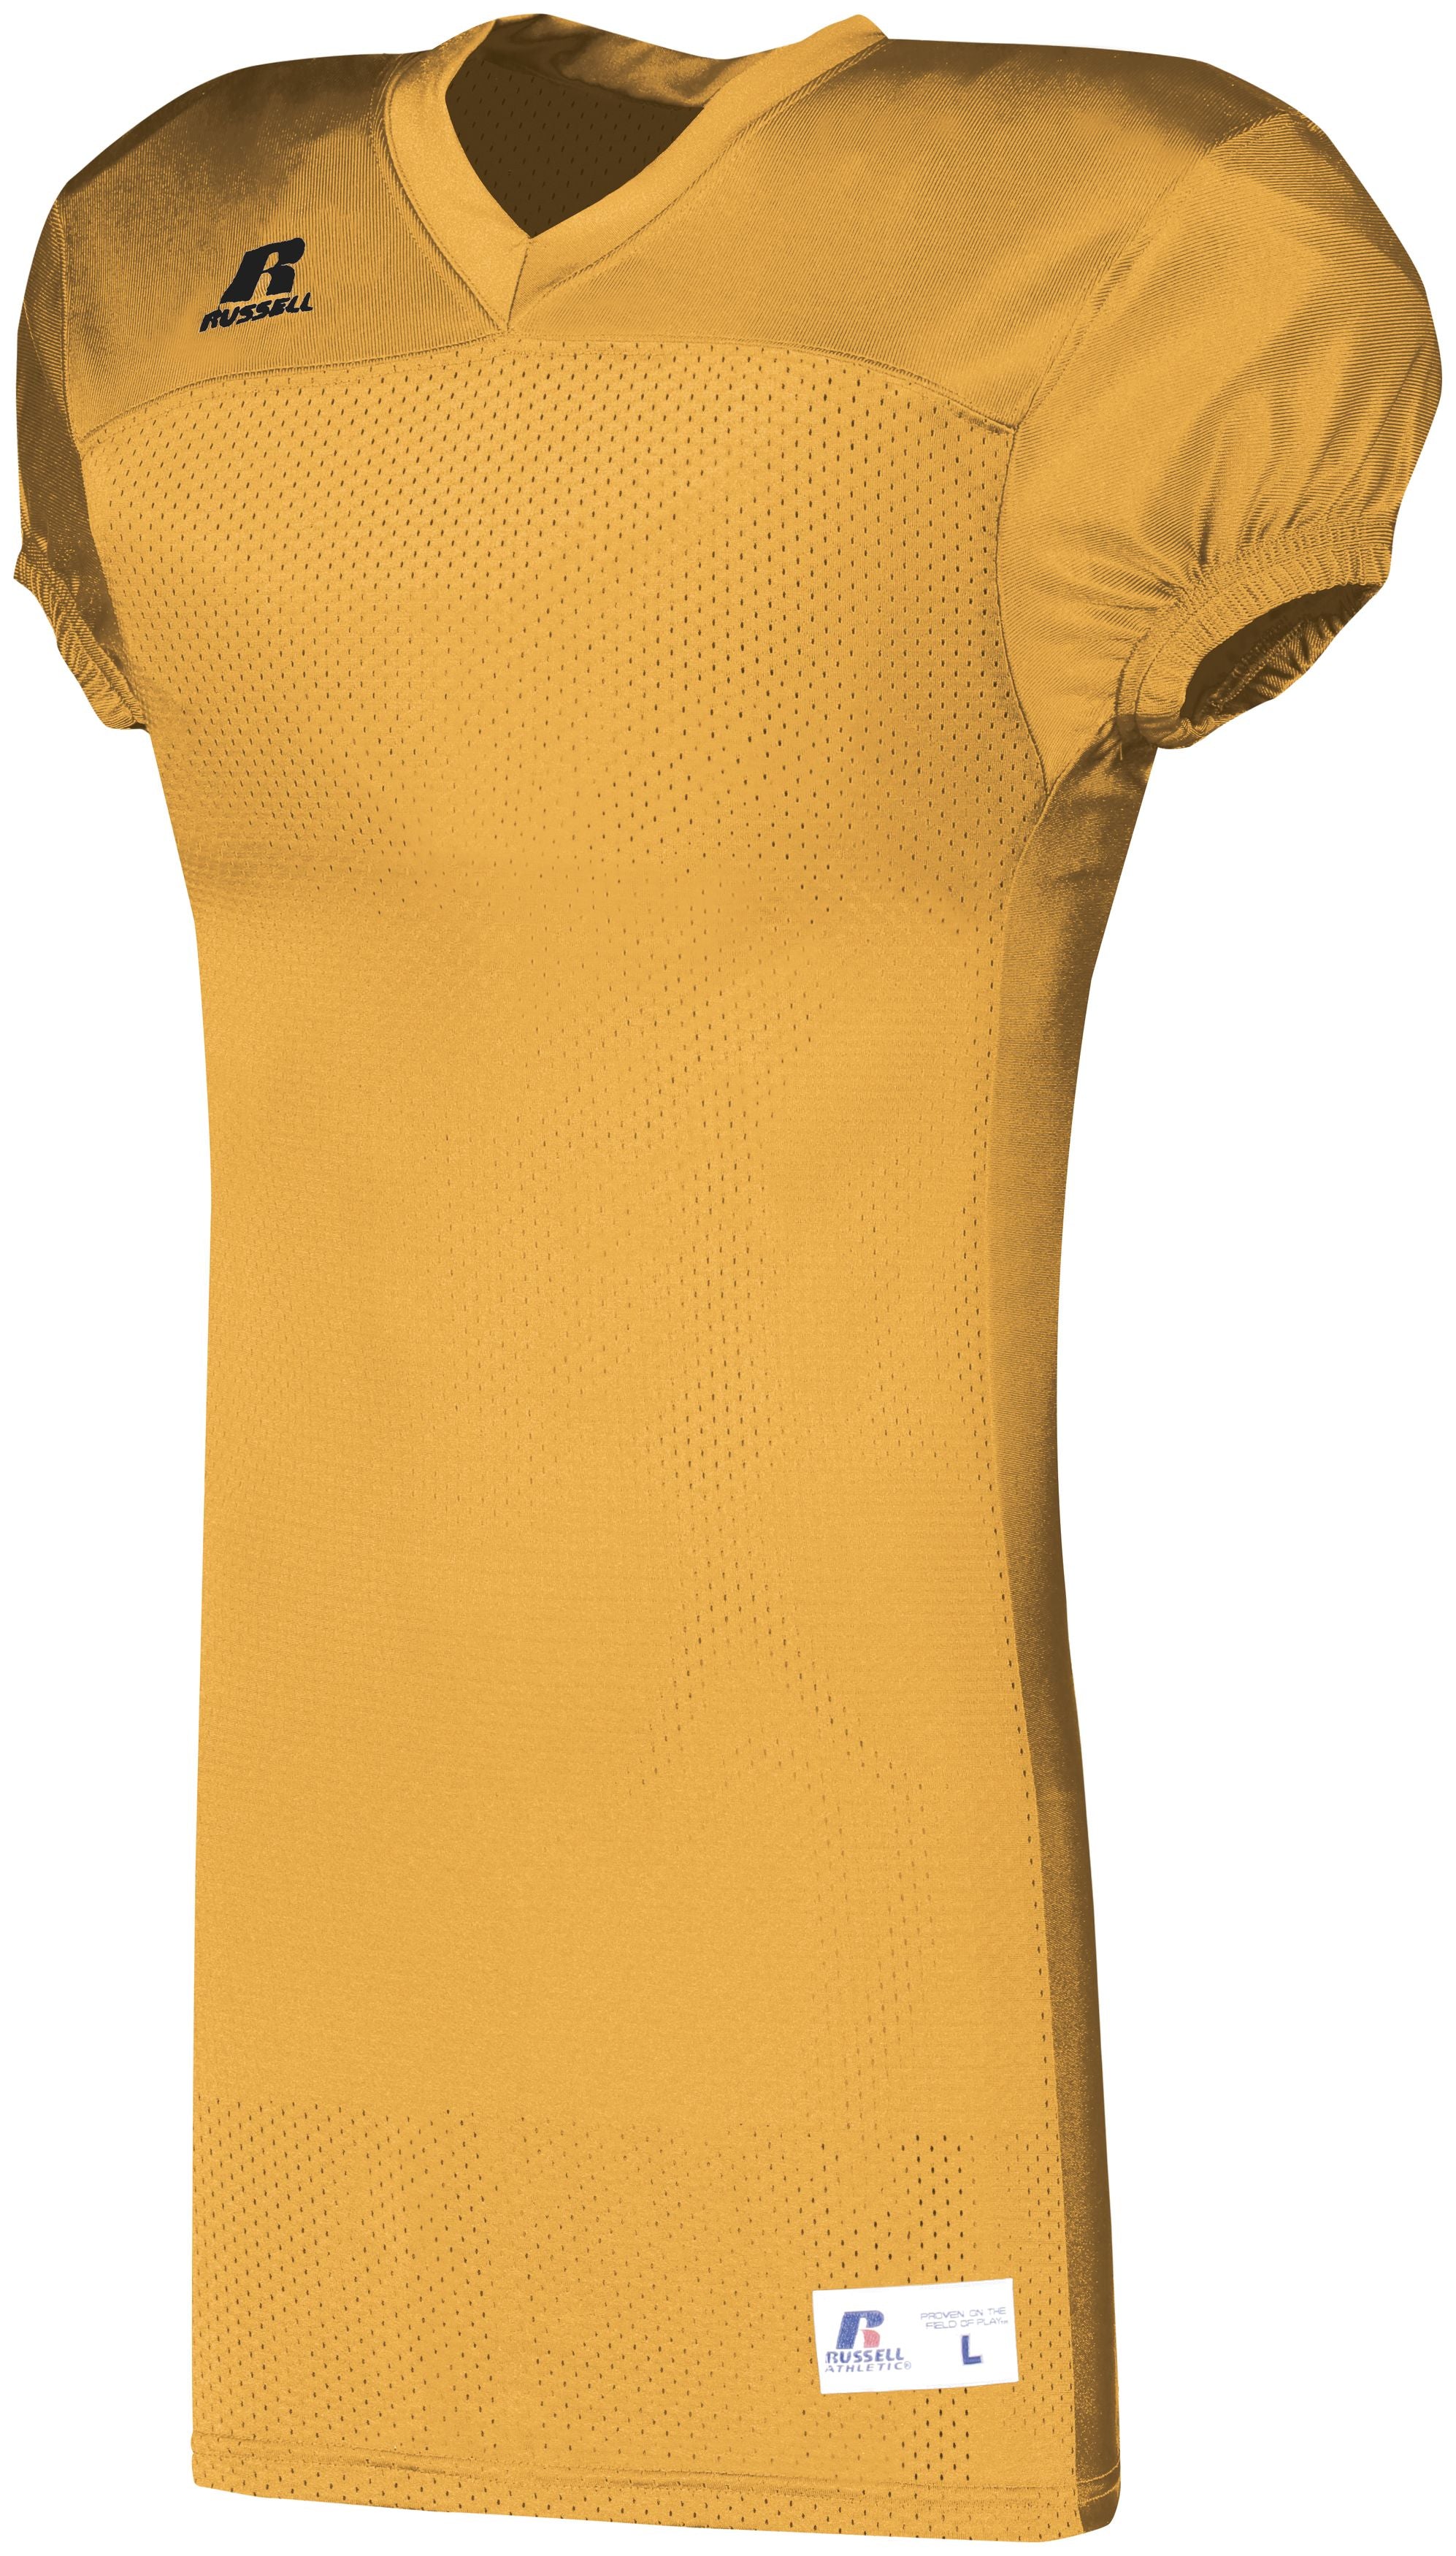 Russell Athletic Solid Jersey With Side Inserts in Gold  -Part of the Adult, Adult-Jersey, Football, Russell-Athletic-Products, Shirts, All-Sports, All-Sports-1 product lines at KanaleyCreations.com